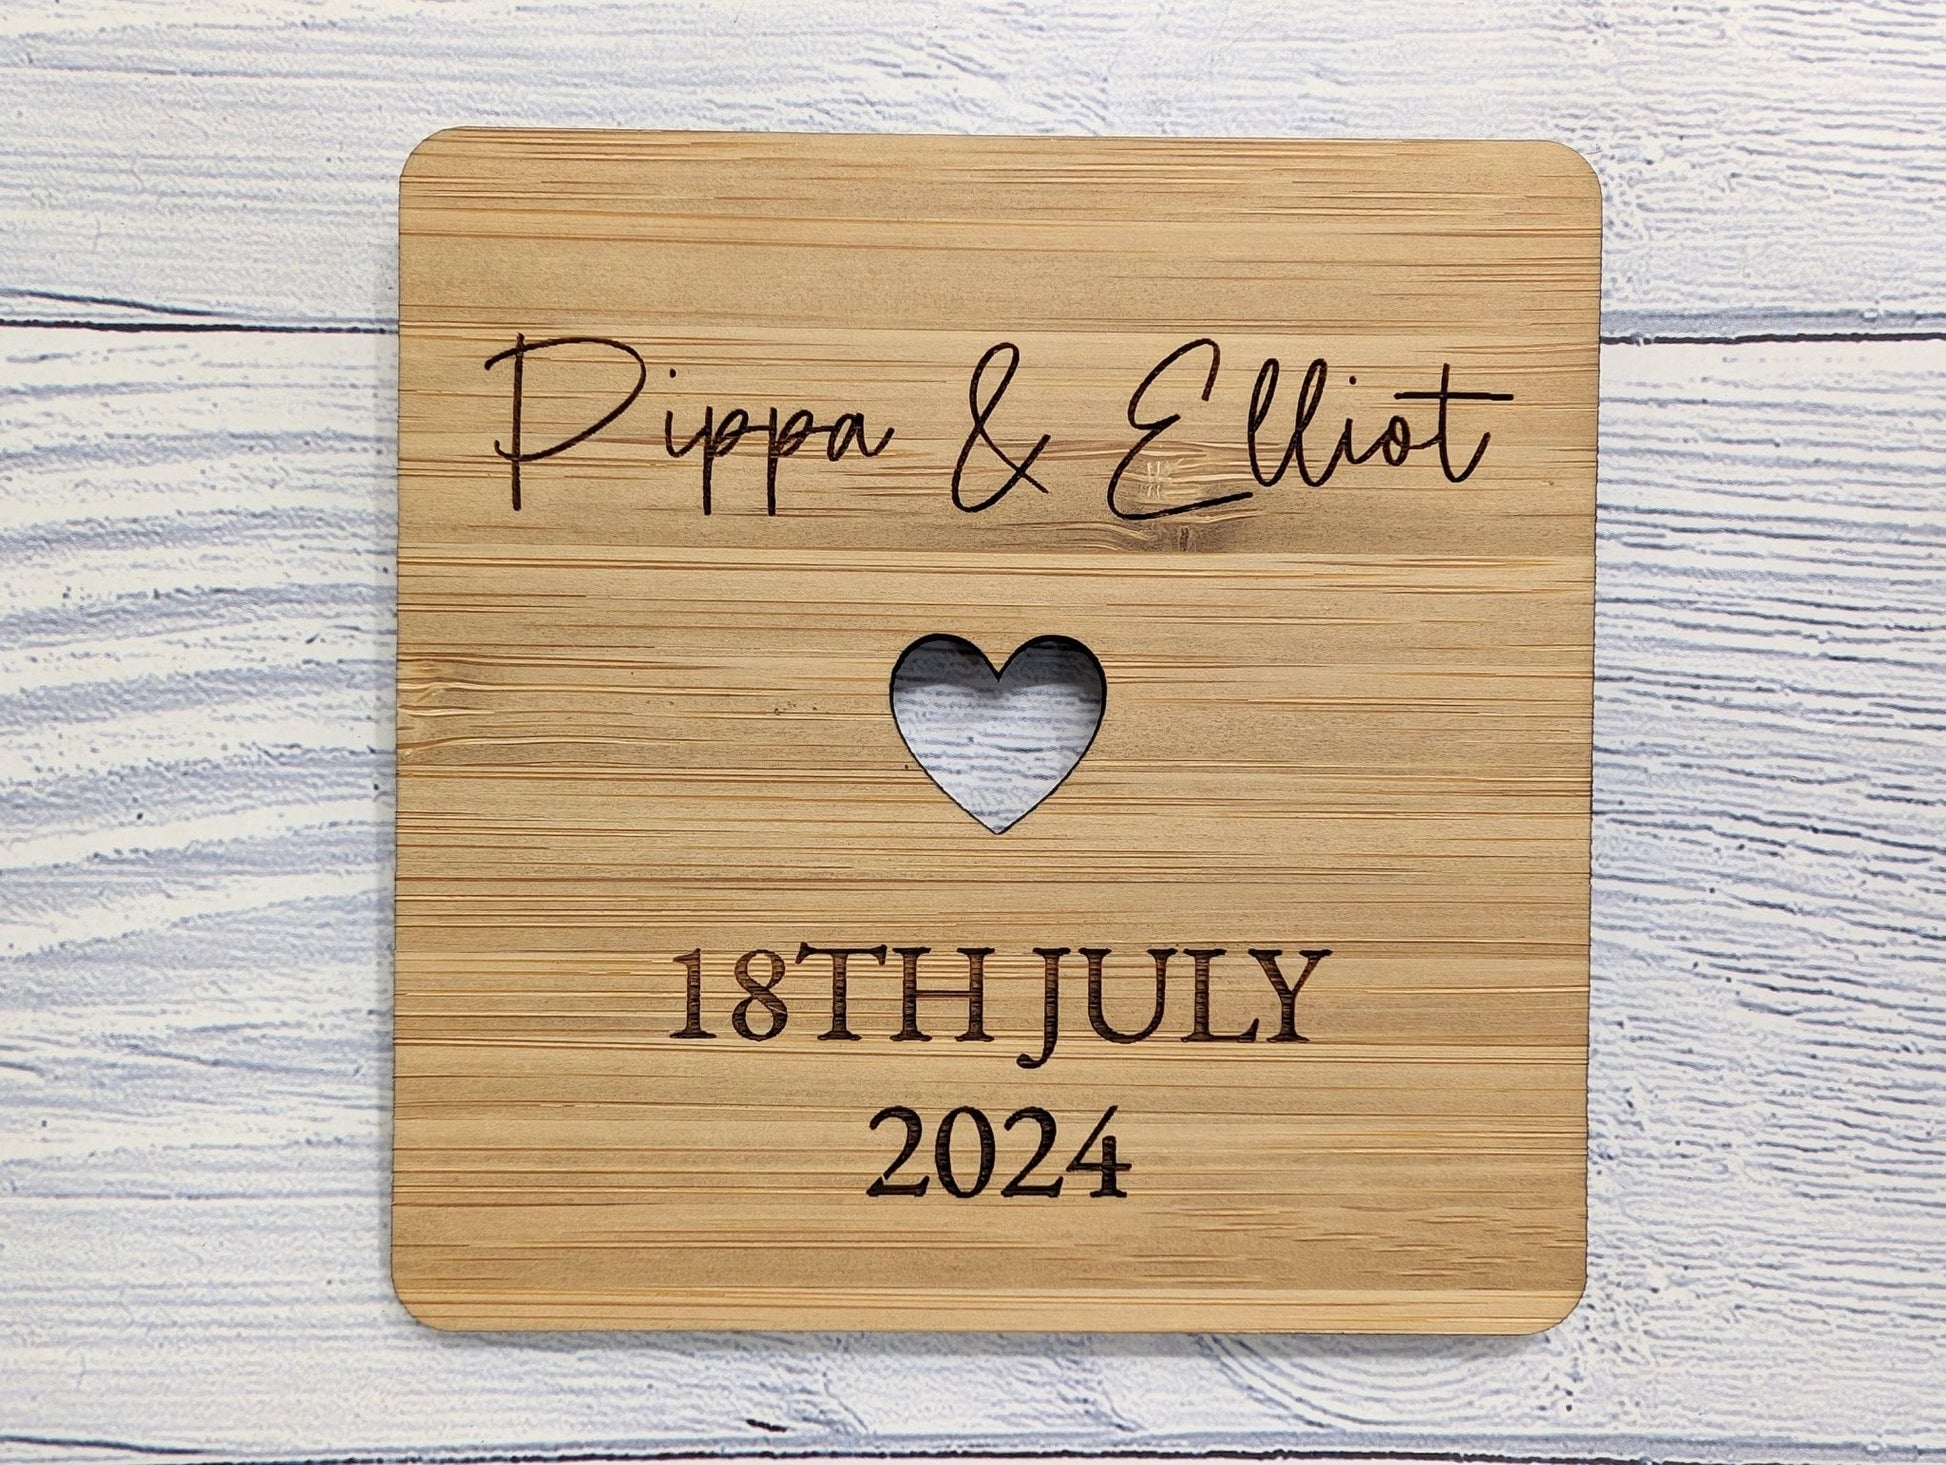 Personalised Bamboo Wedding Coasters - Customizable with Names, Date & Heart Design, 90mm x 90mm, Unique Wedding Favors - CherryGroveCraft